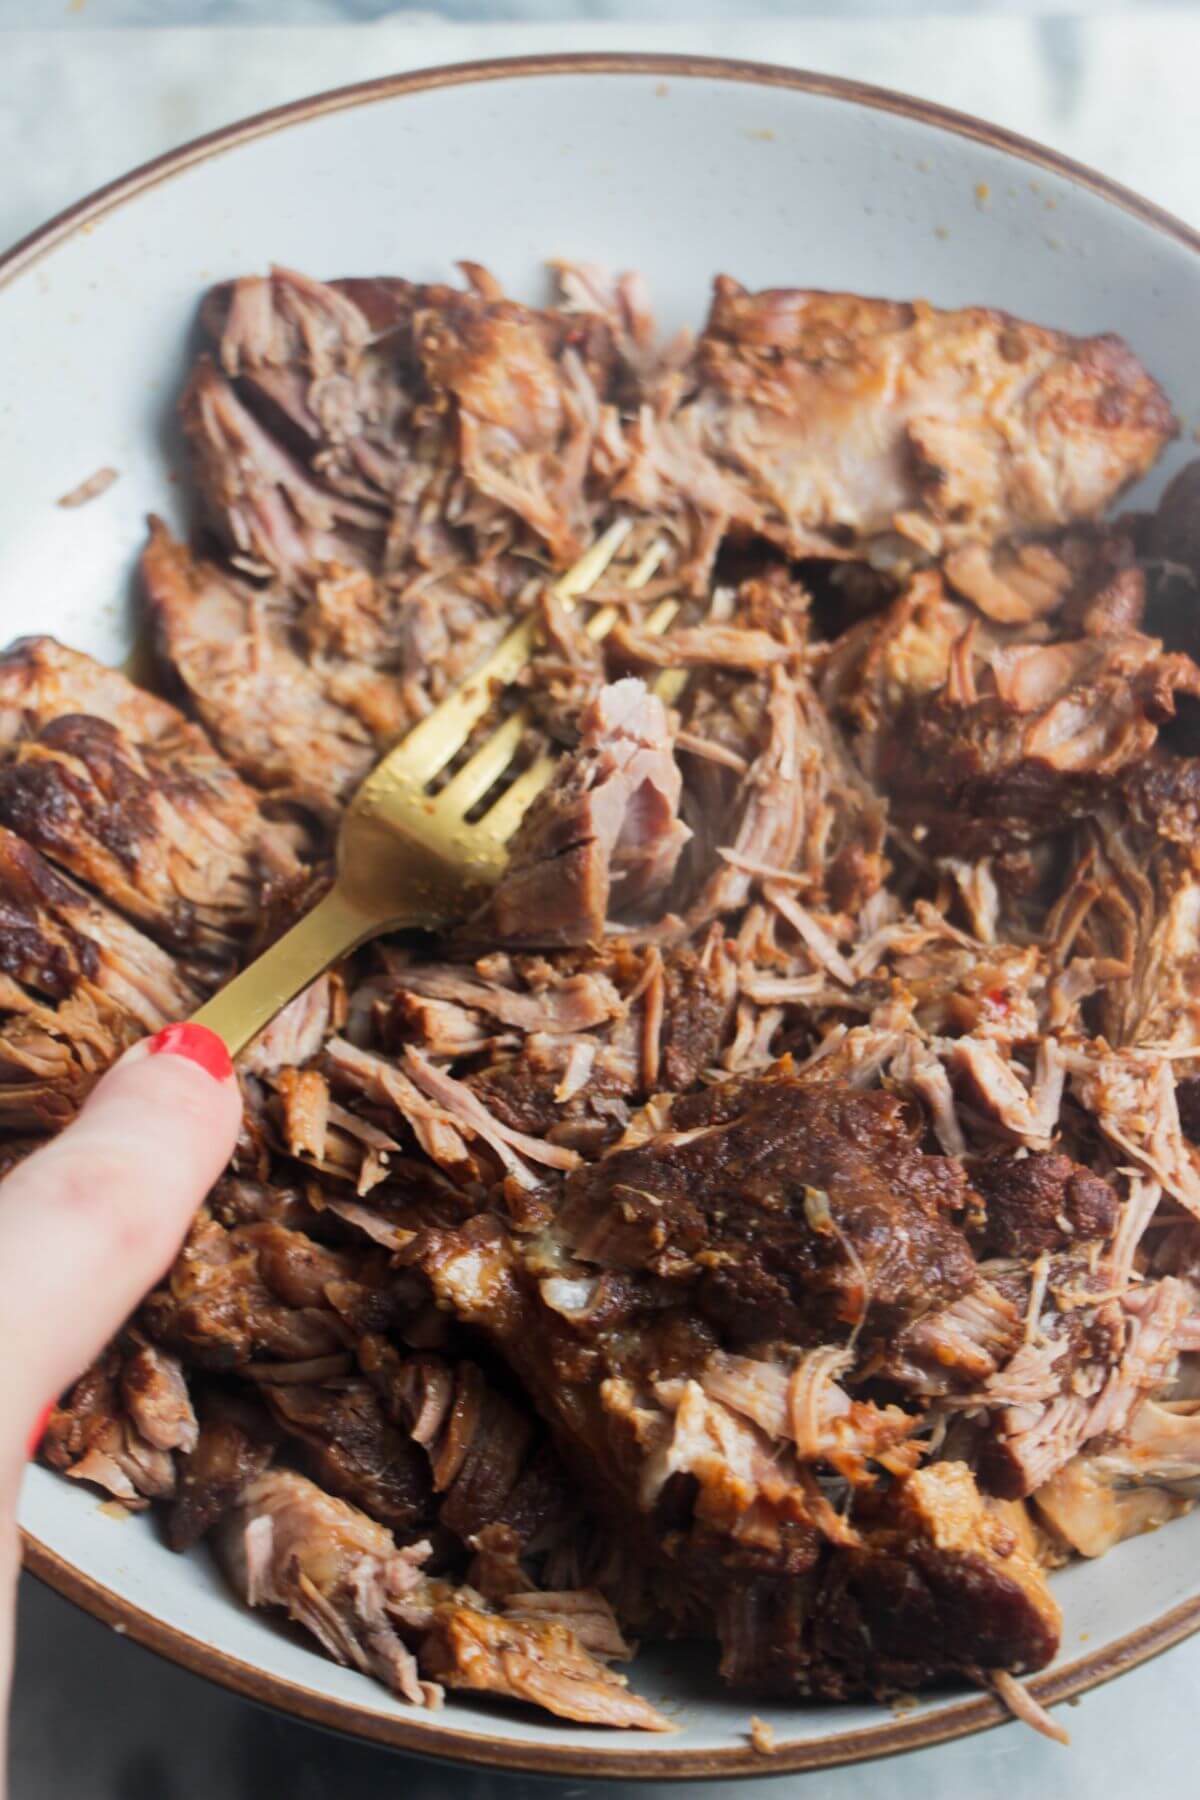 Hand holding a gold fork pulling pork in a bowl.